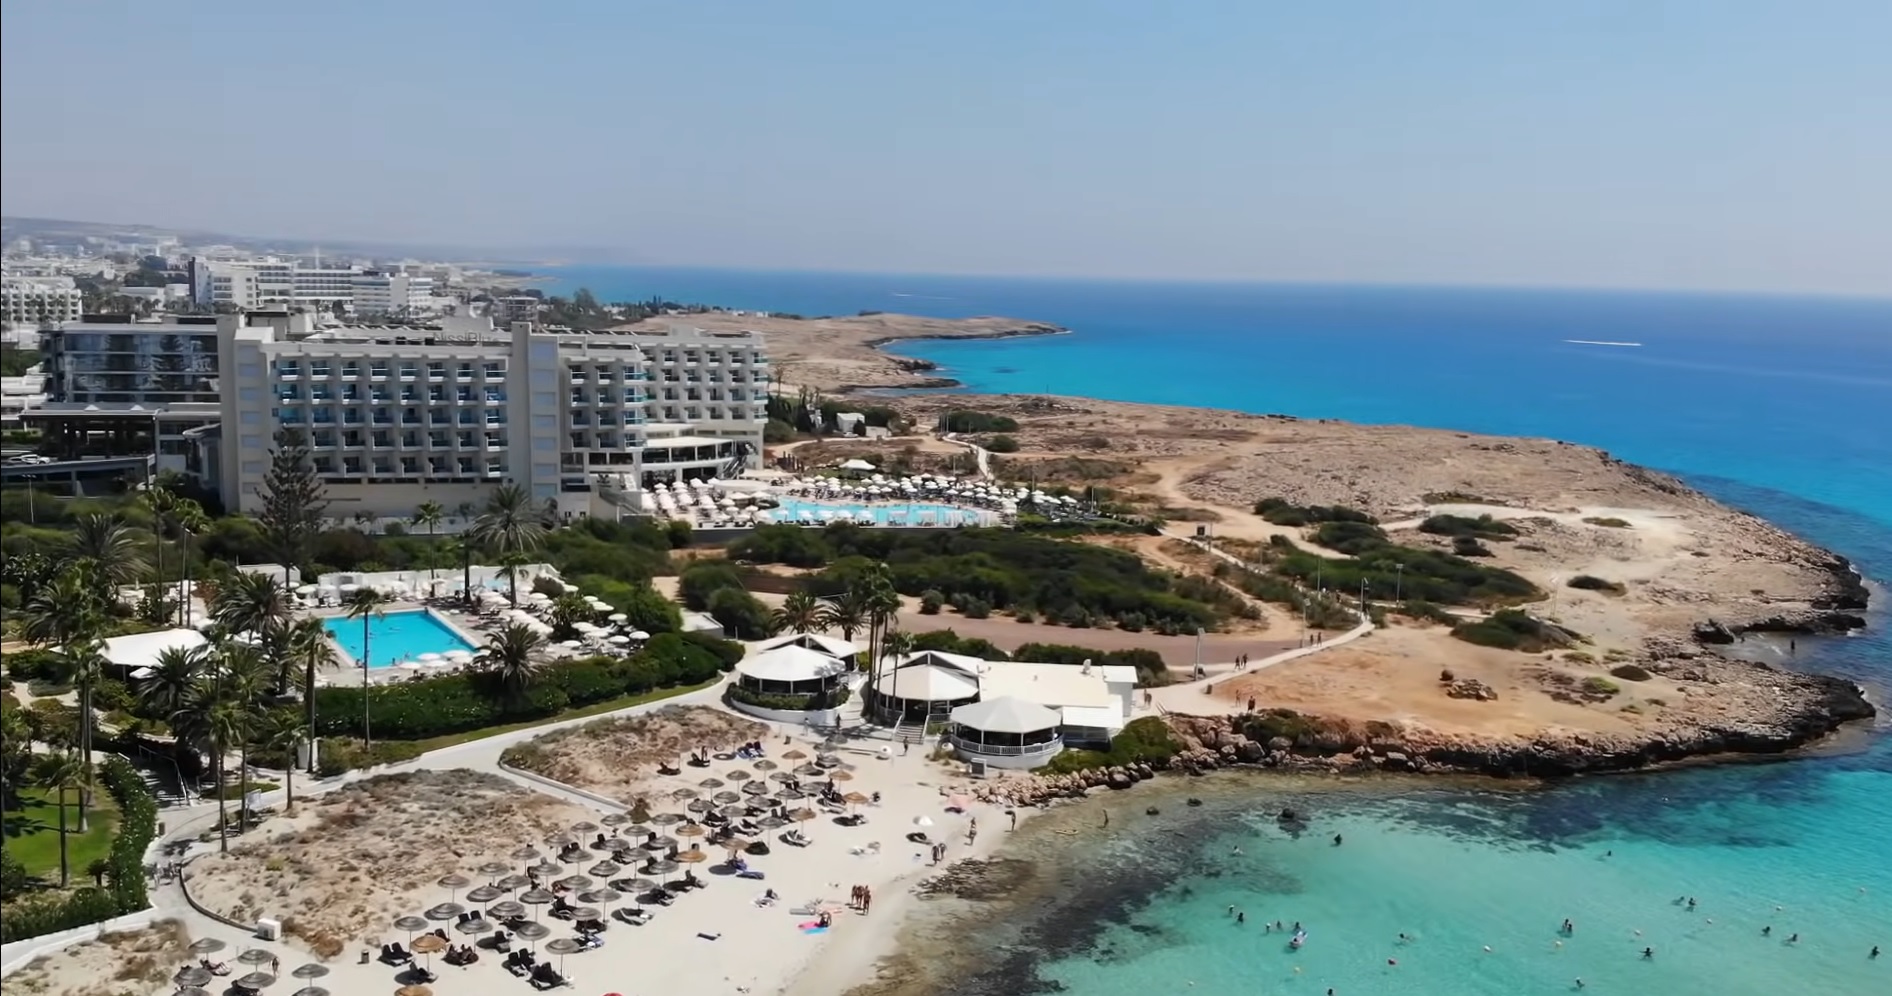 Cyprus hoteliers look to Greece for solutions to common issues